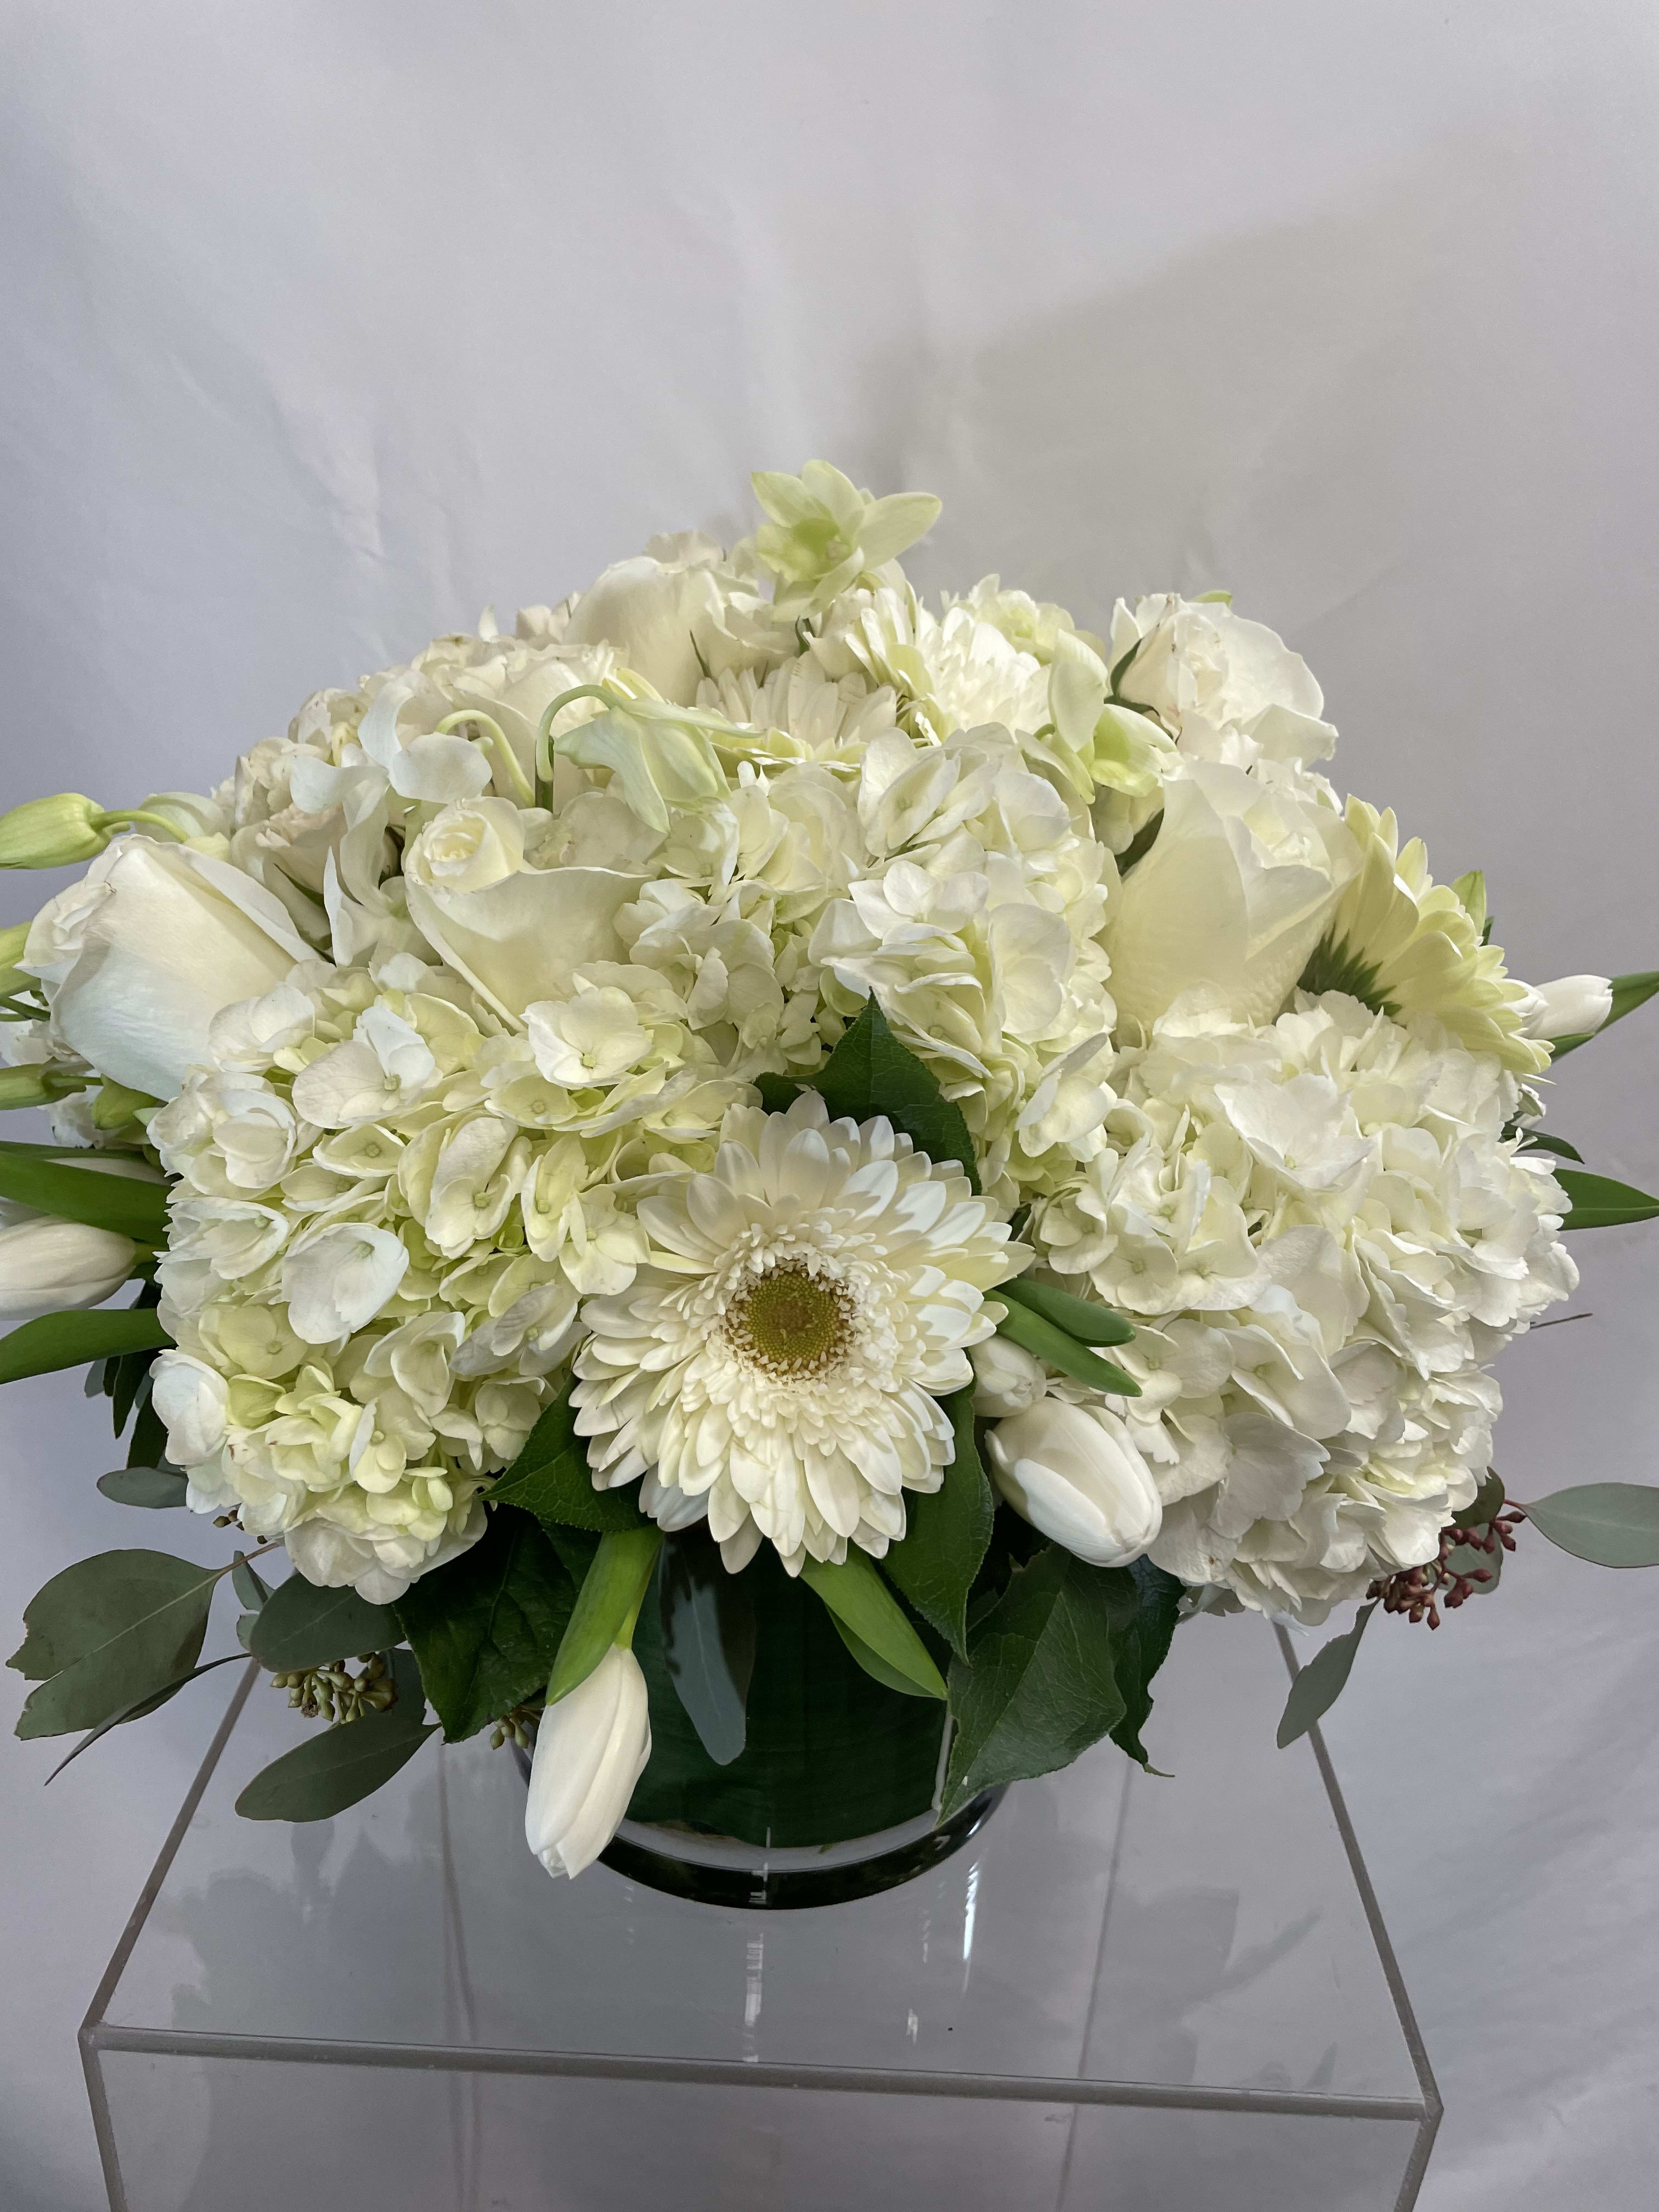 Simple Elegance Arrangement  - What an exquisite high end flower arrangement. Made with all Holland flowers in white &amp; soft green. A show stopping piece sure to impress a client or loved one.  